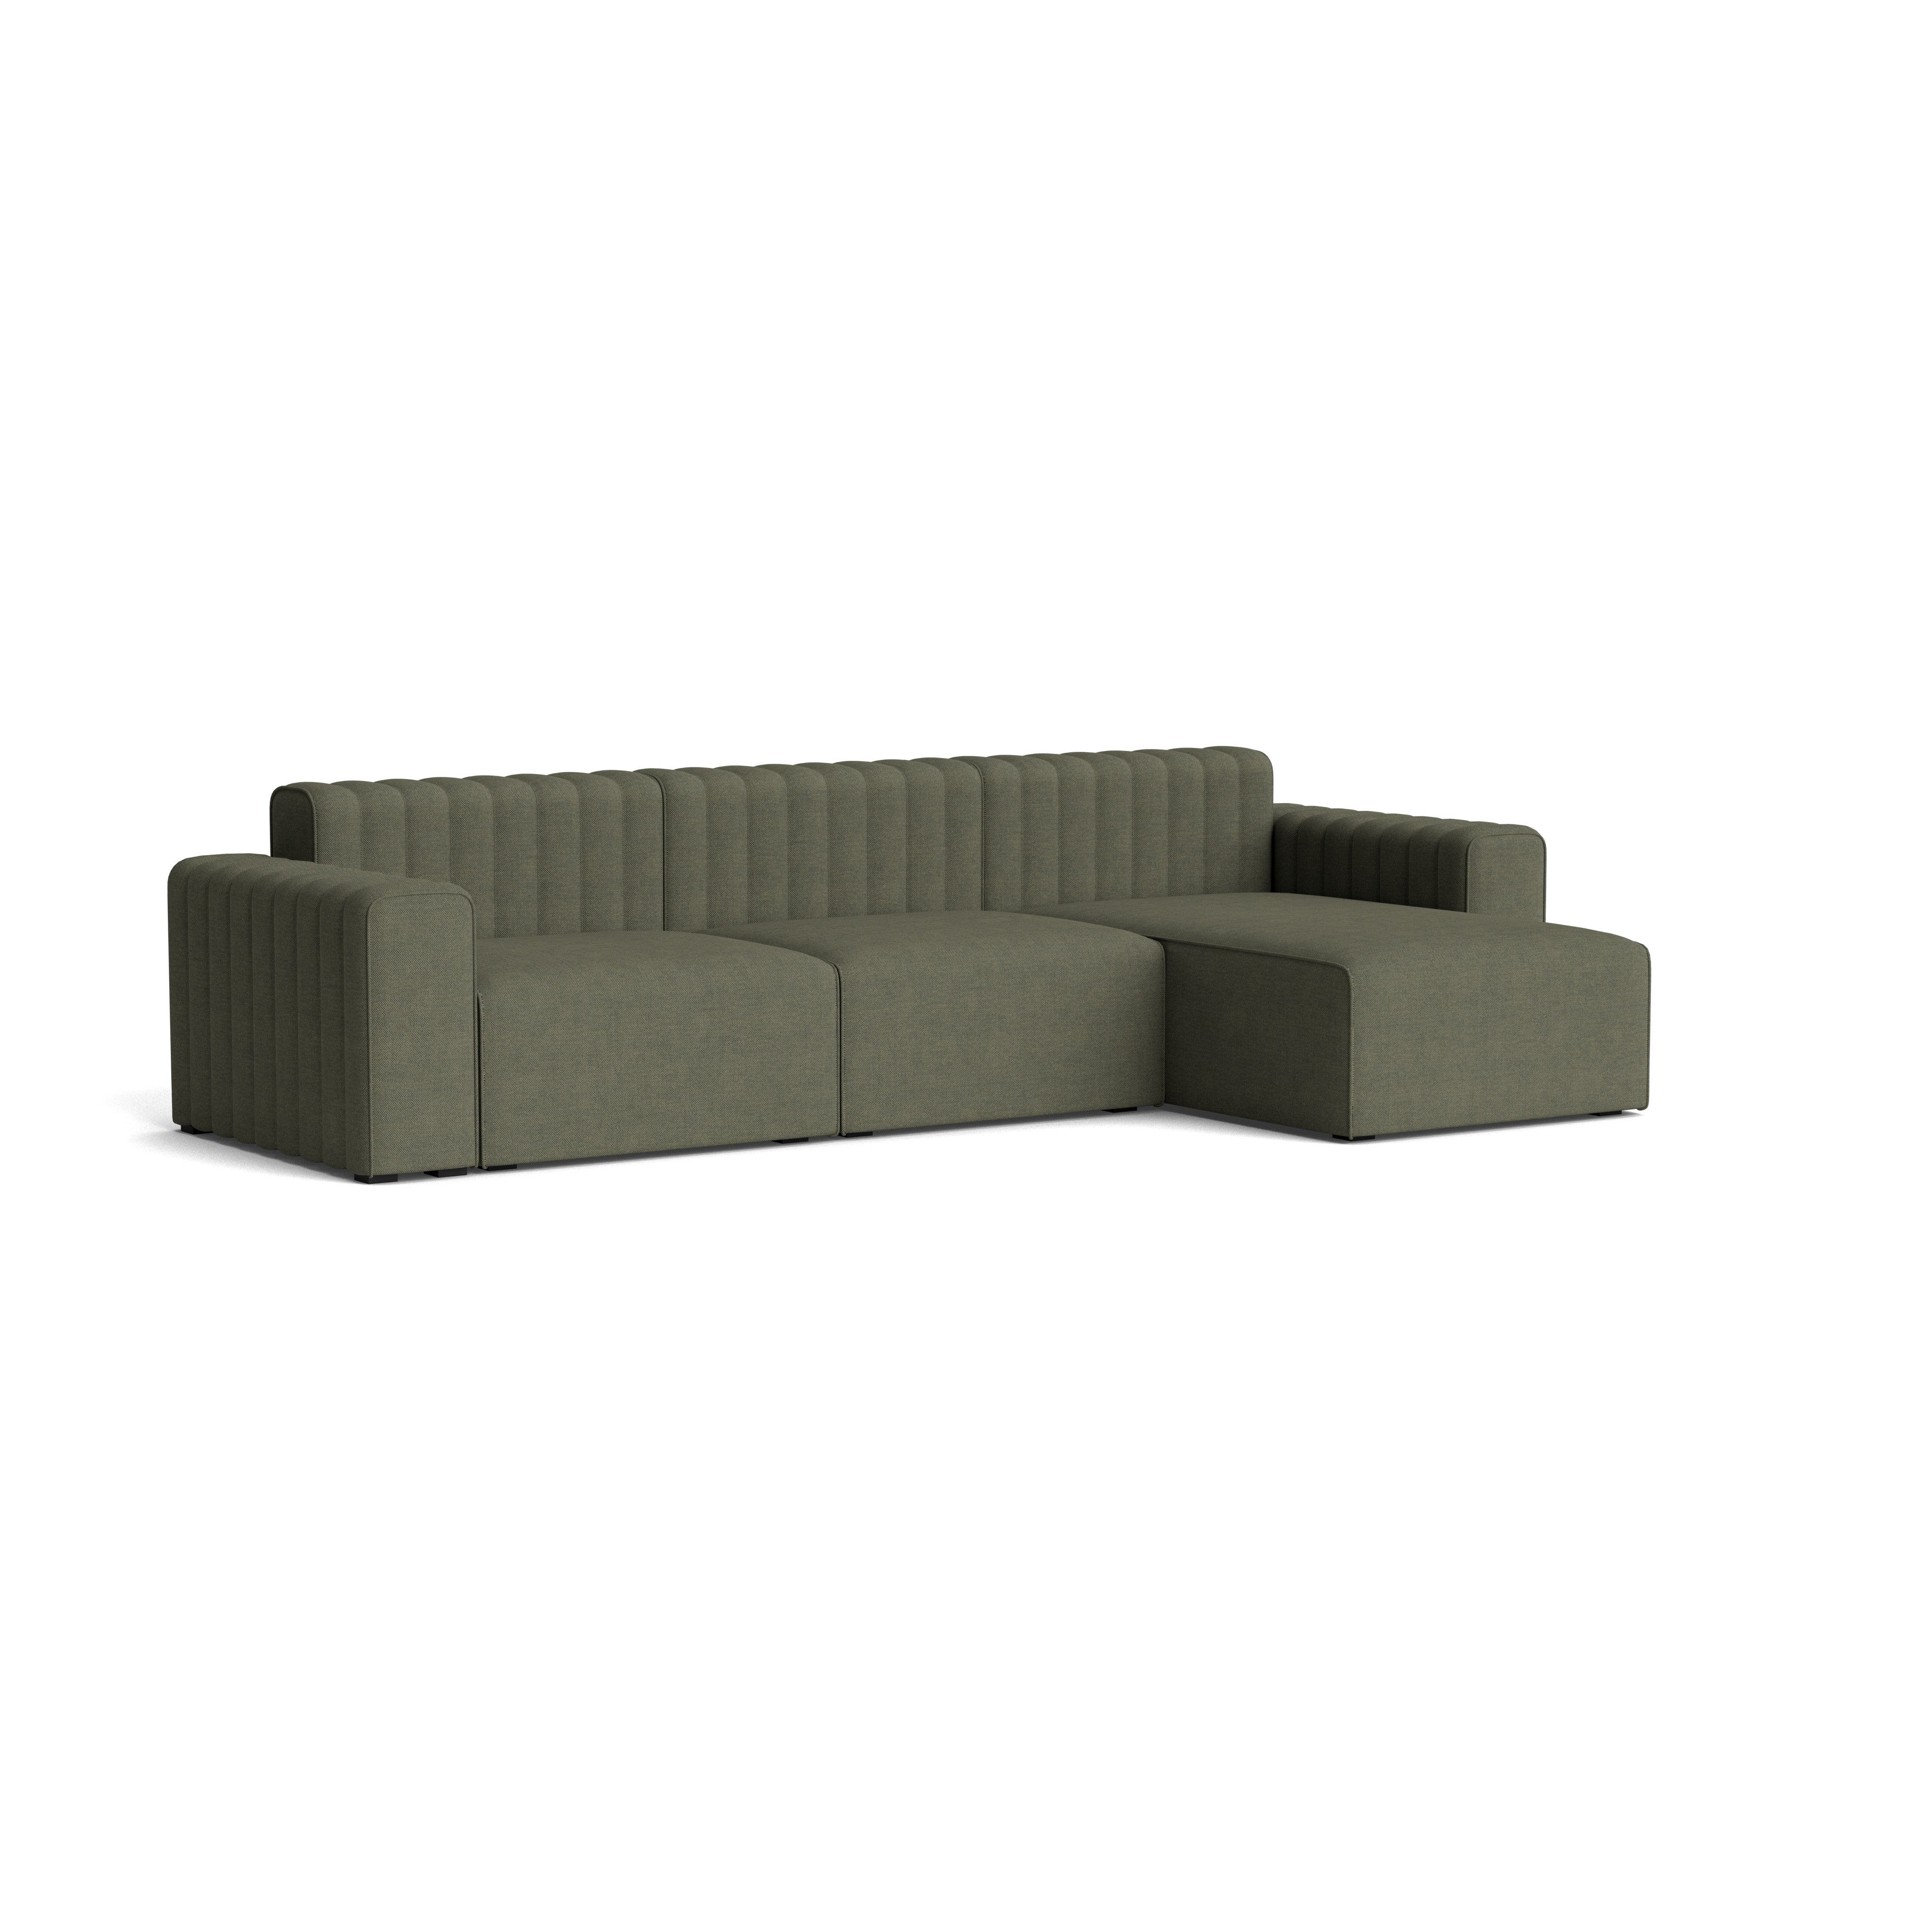 RIFF Sofa, Three Seater with Chaise Lounge Left (Chaise Longue Left, Center, Right Arm)